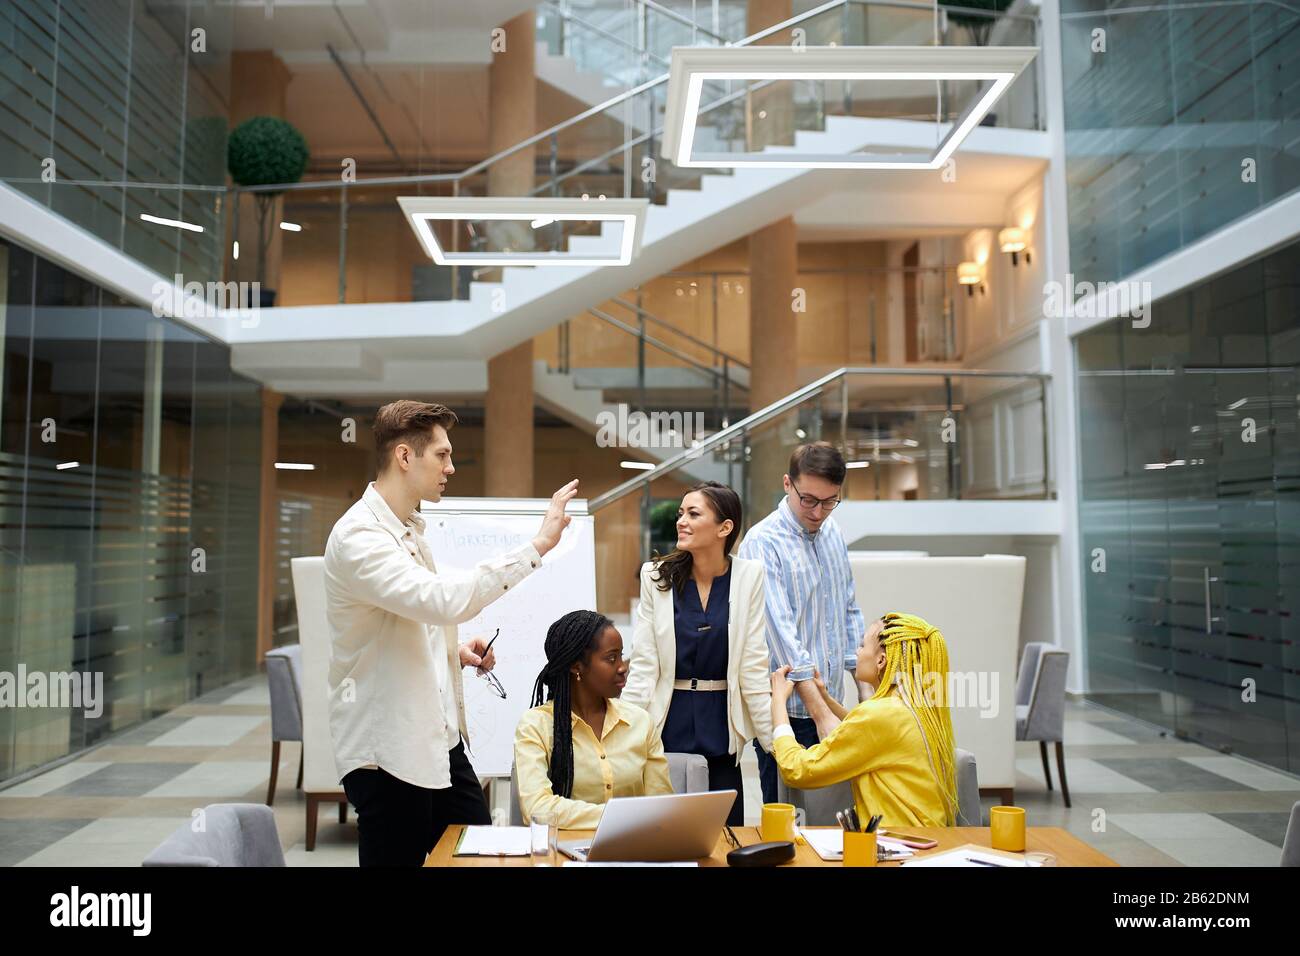 young diverse people having a rest after meeting, conversation. women and men taking part in the experiment, guy in glasses and white shirt running a Stock Photo